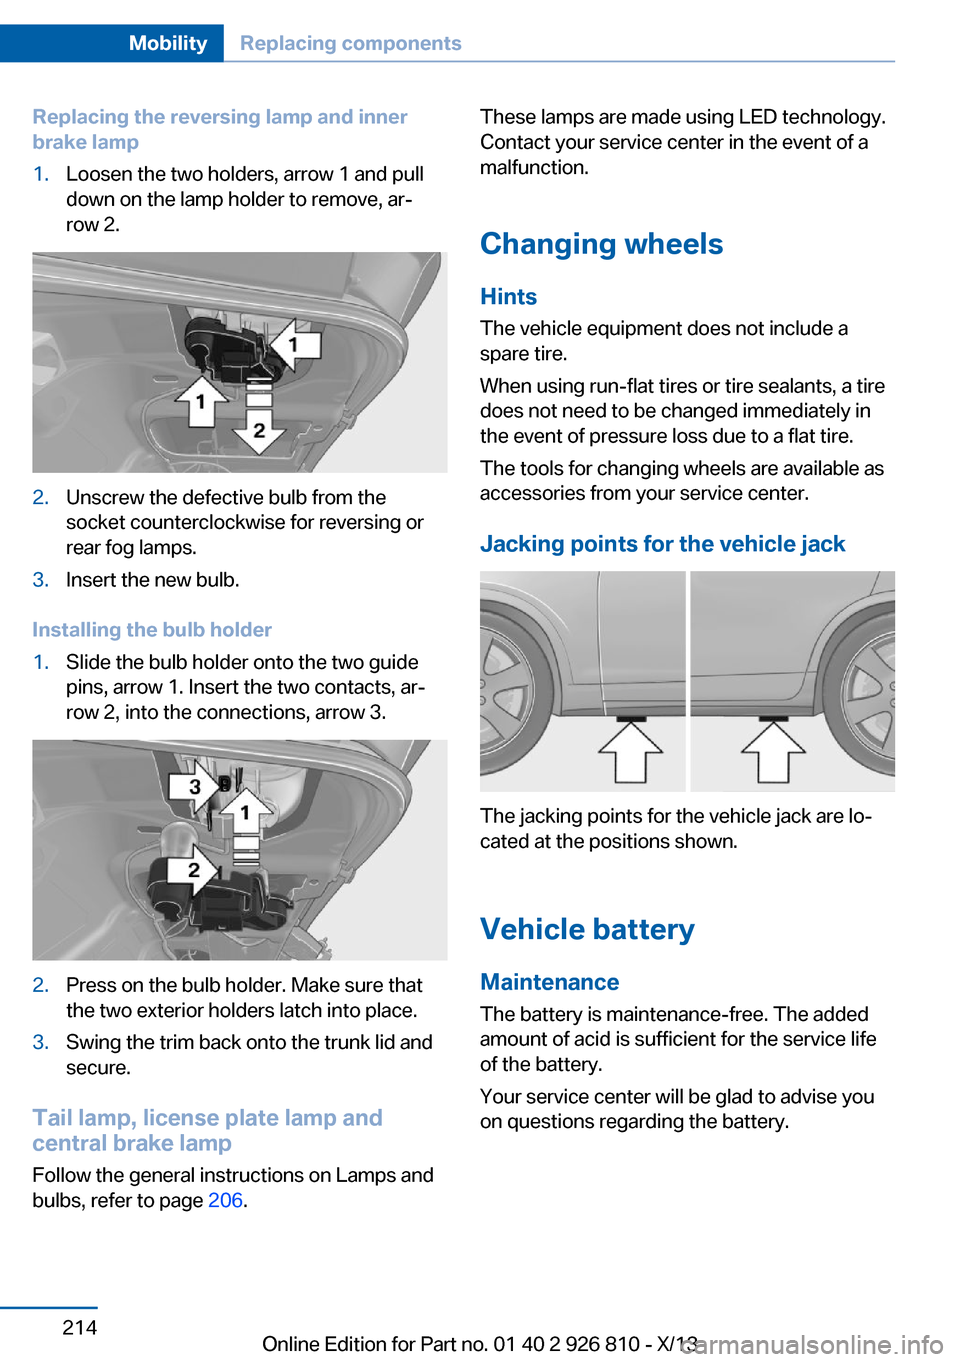 BMW 3 SERIES SEDAN 2013 F30 Service Manual Replacing the reversing lamp and inner
brake lamp1.Loosen the two holders, arrow 1 and pull
down on the lamp holder to remove, ar‐
row 2.2.Unscrew the defective bulb from the
socket counterclockwise